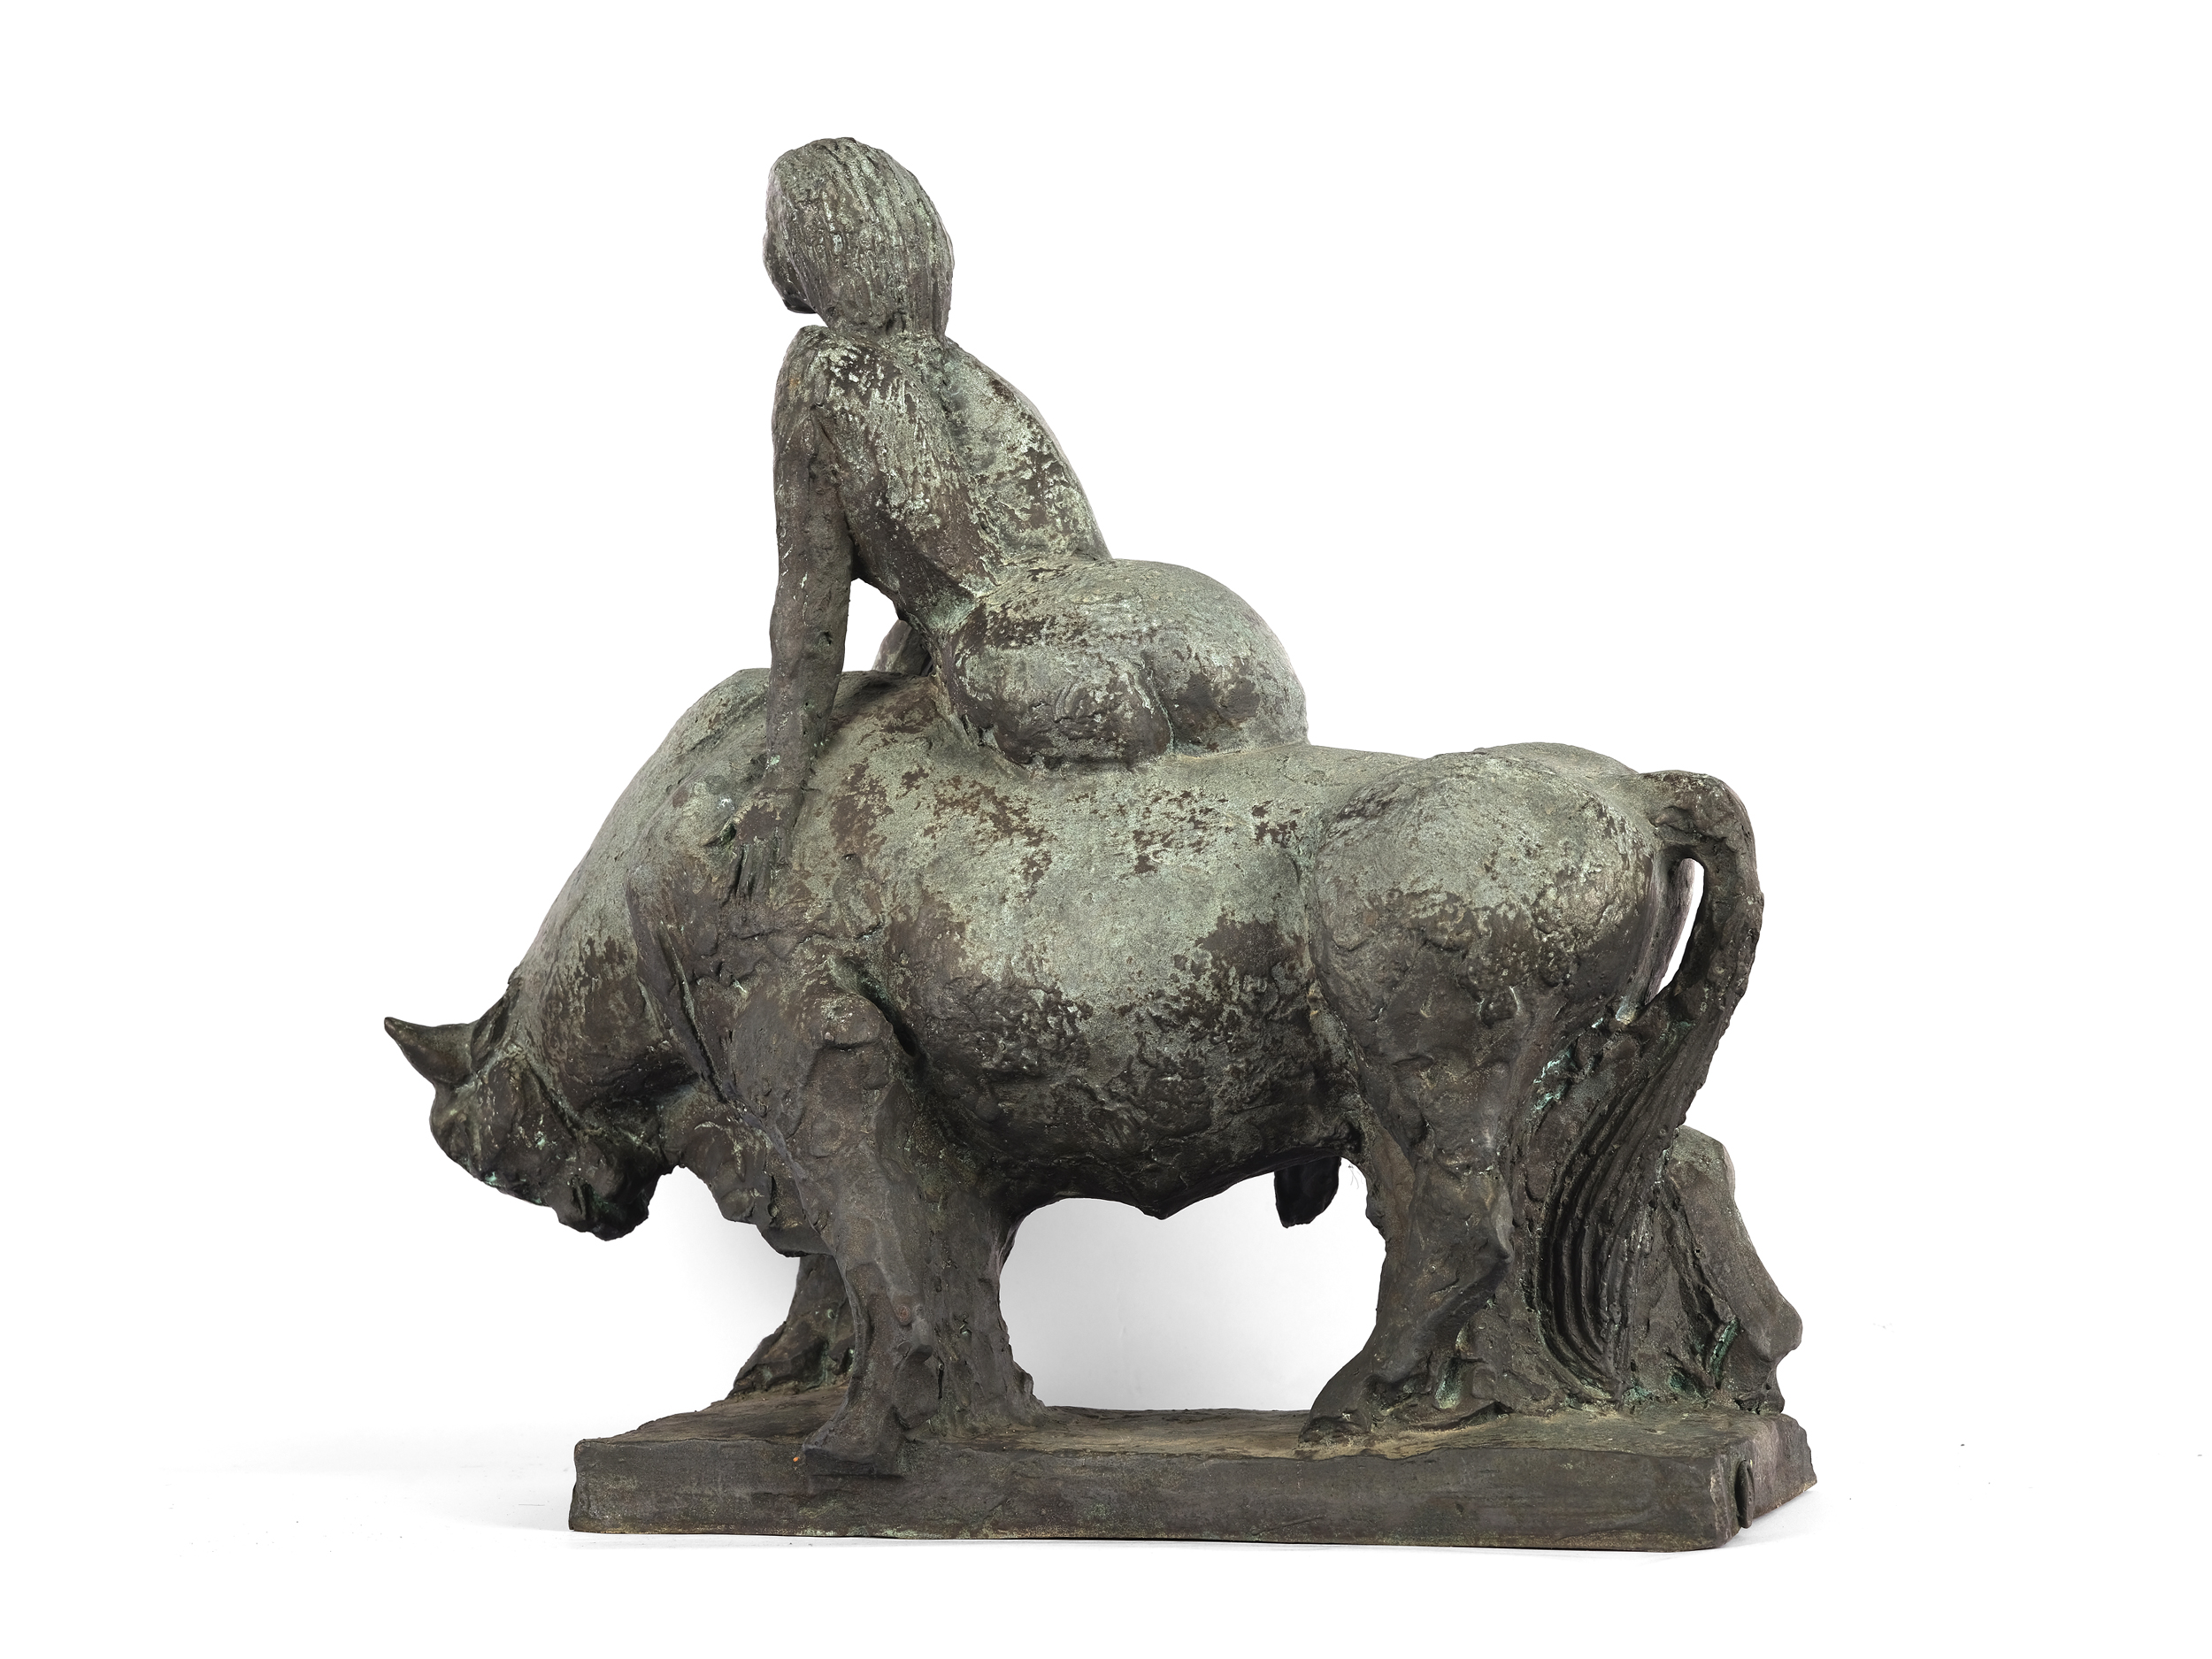 Unknown artist, Europe on the bull, 1950s/60s - Image 3 of 6